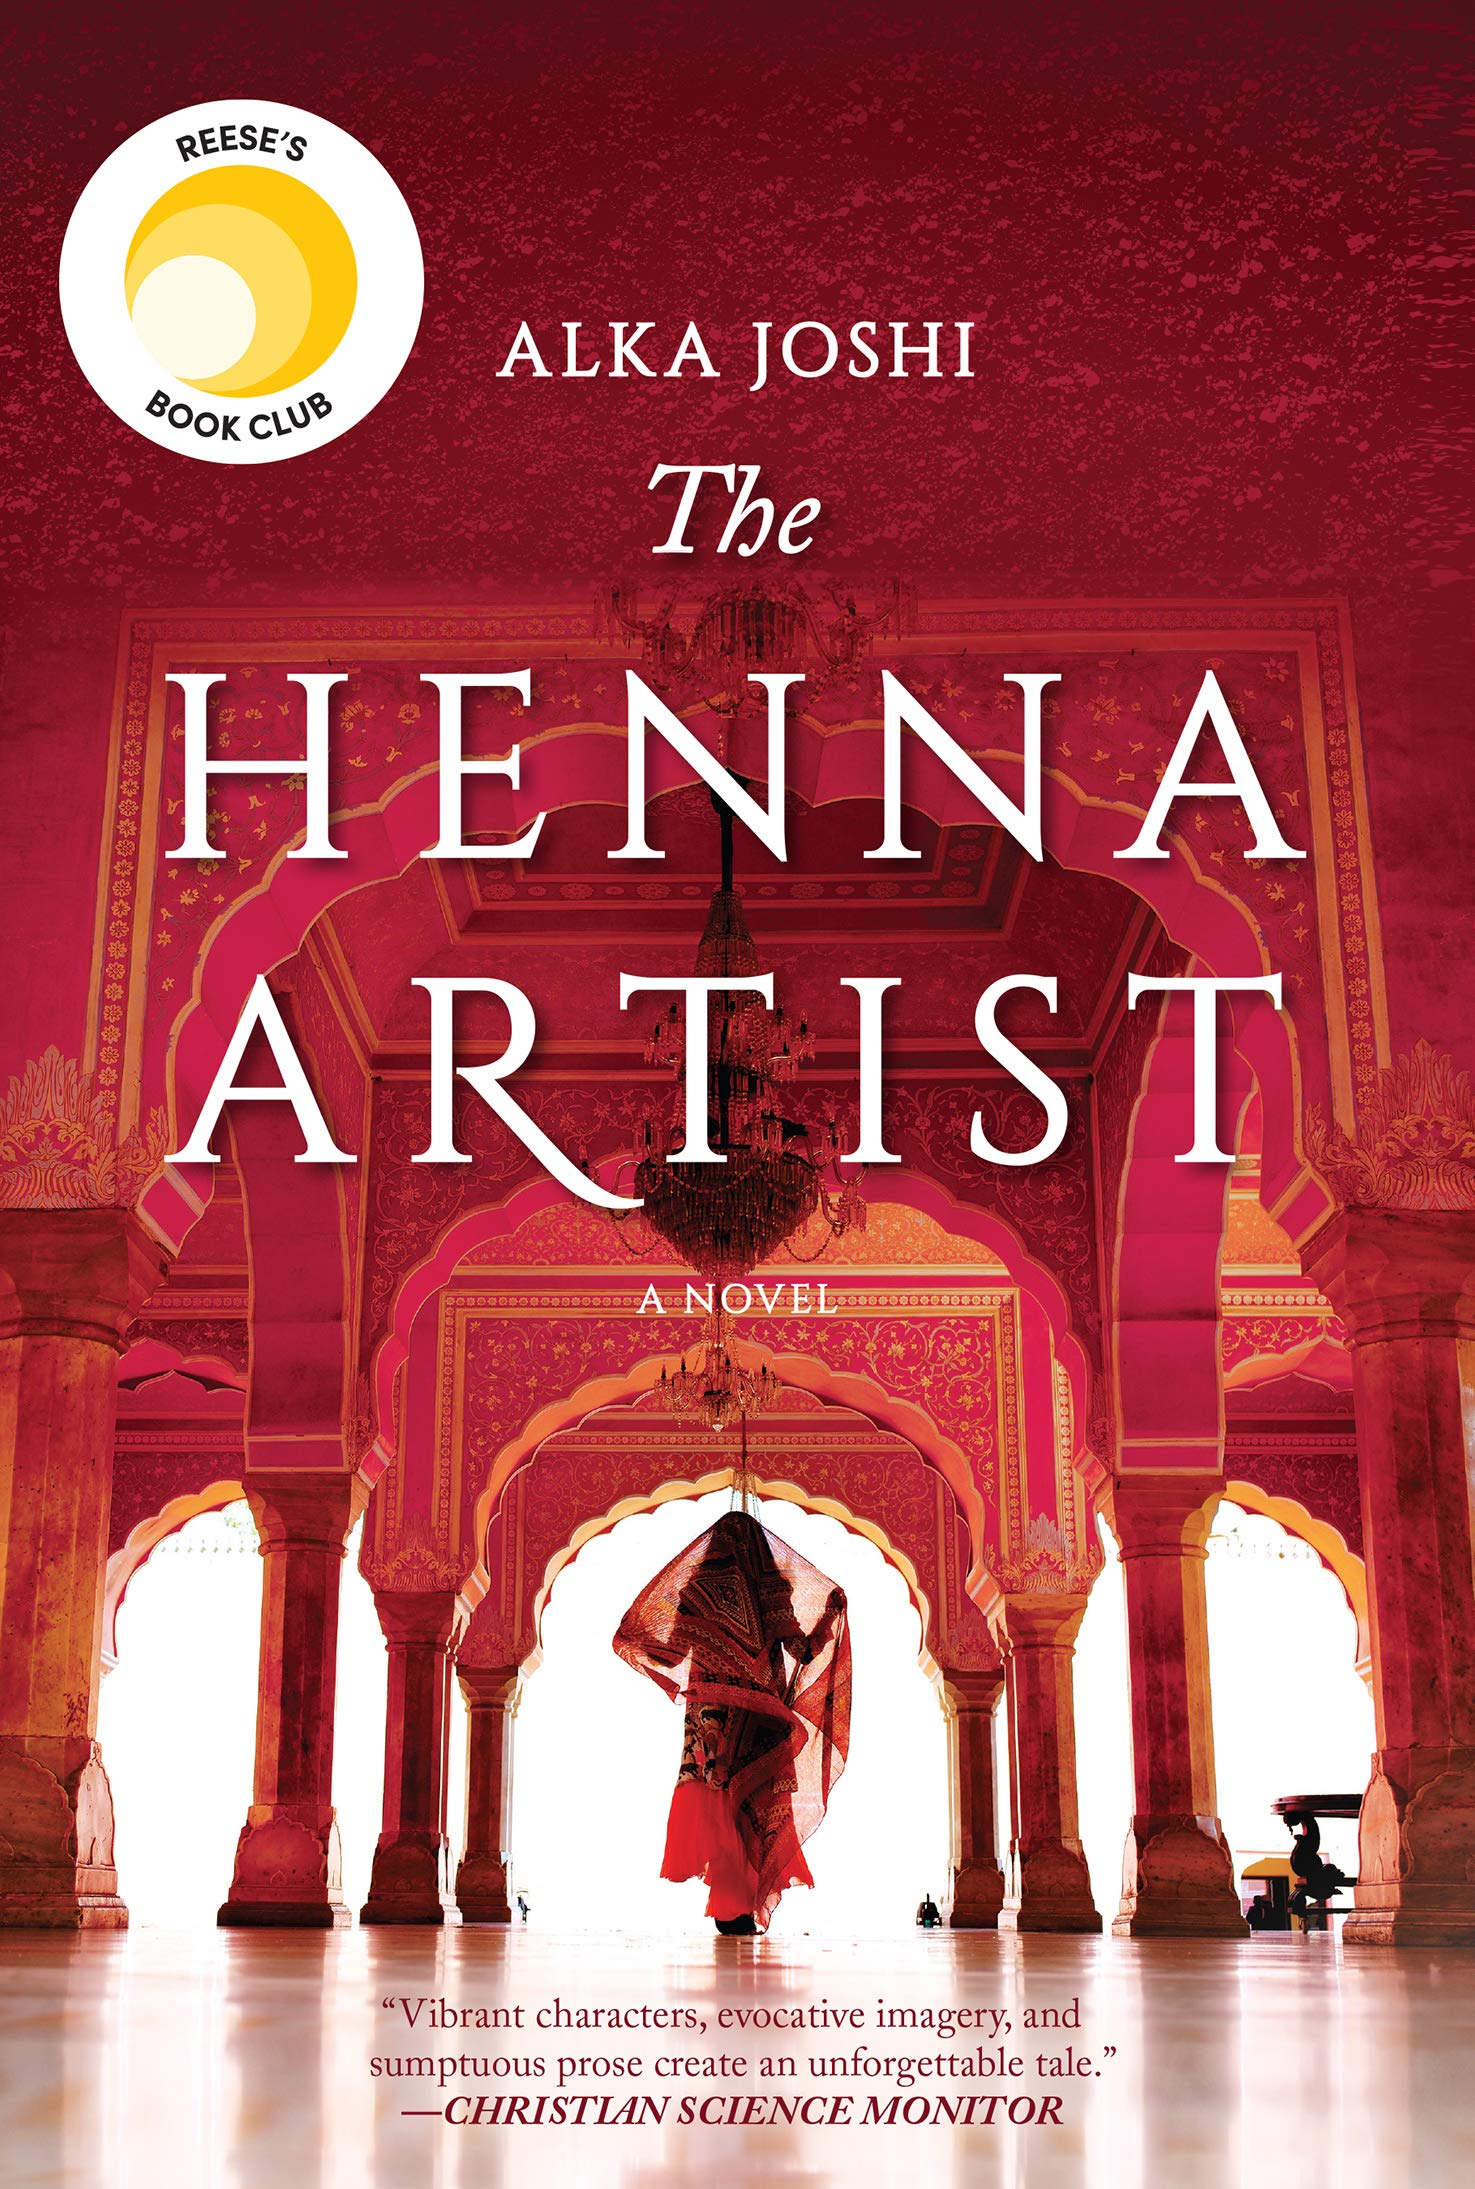 The Henna Artist by Alka Joshi book cover done in reds with what looks like an Indian temple and a woman in a red sari walking through the center. Reese Witherspoon book club logo on top left corner.